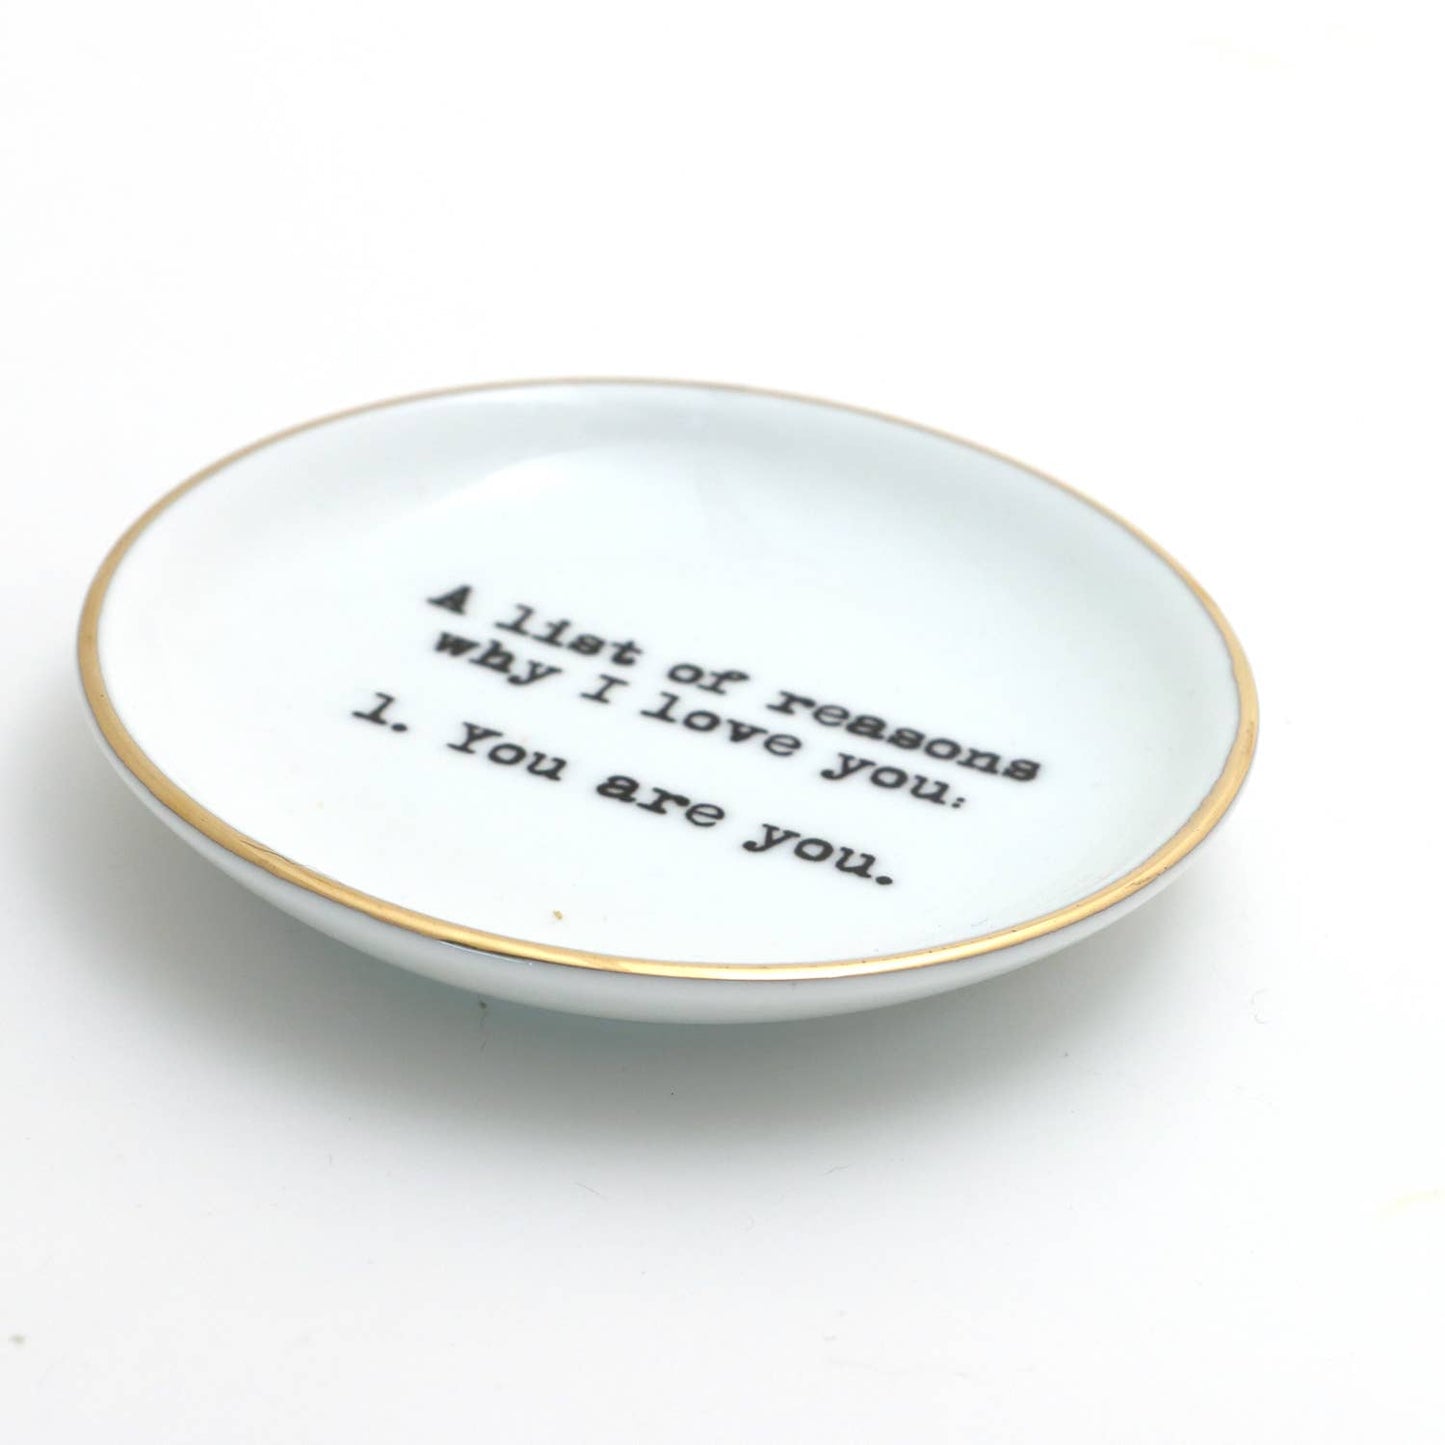 Reasons I Love You Ring Dish,with 22K Gold, ring holder